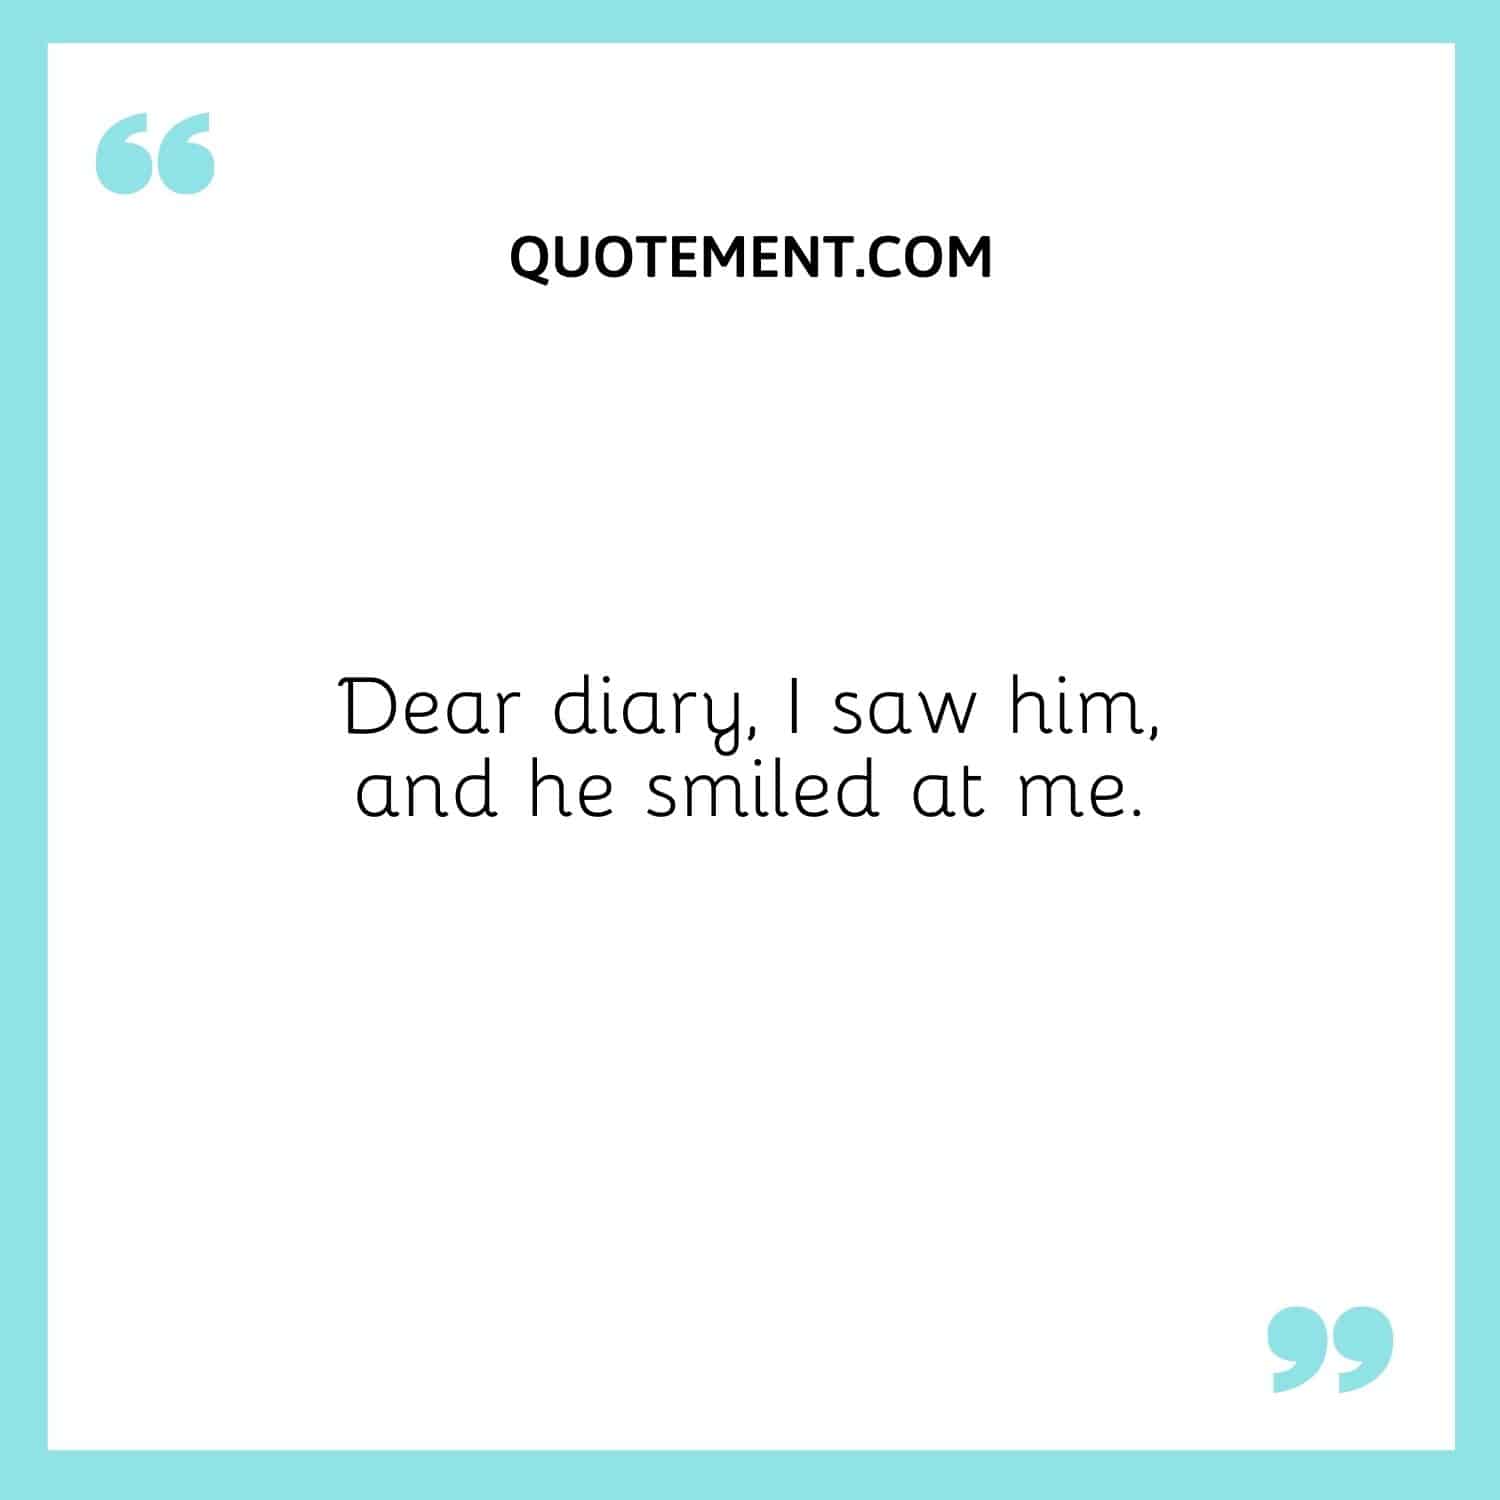 Dear diary, I saw him, and he smiled at me